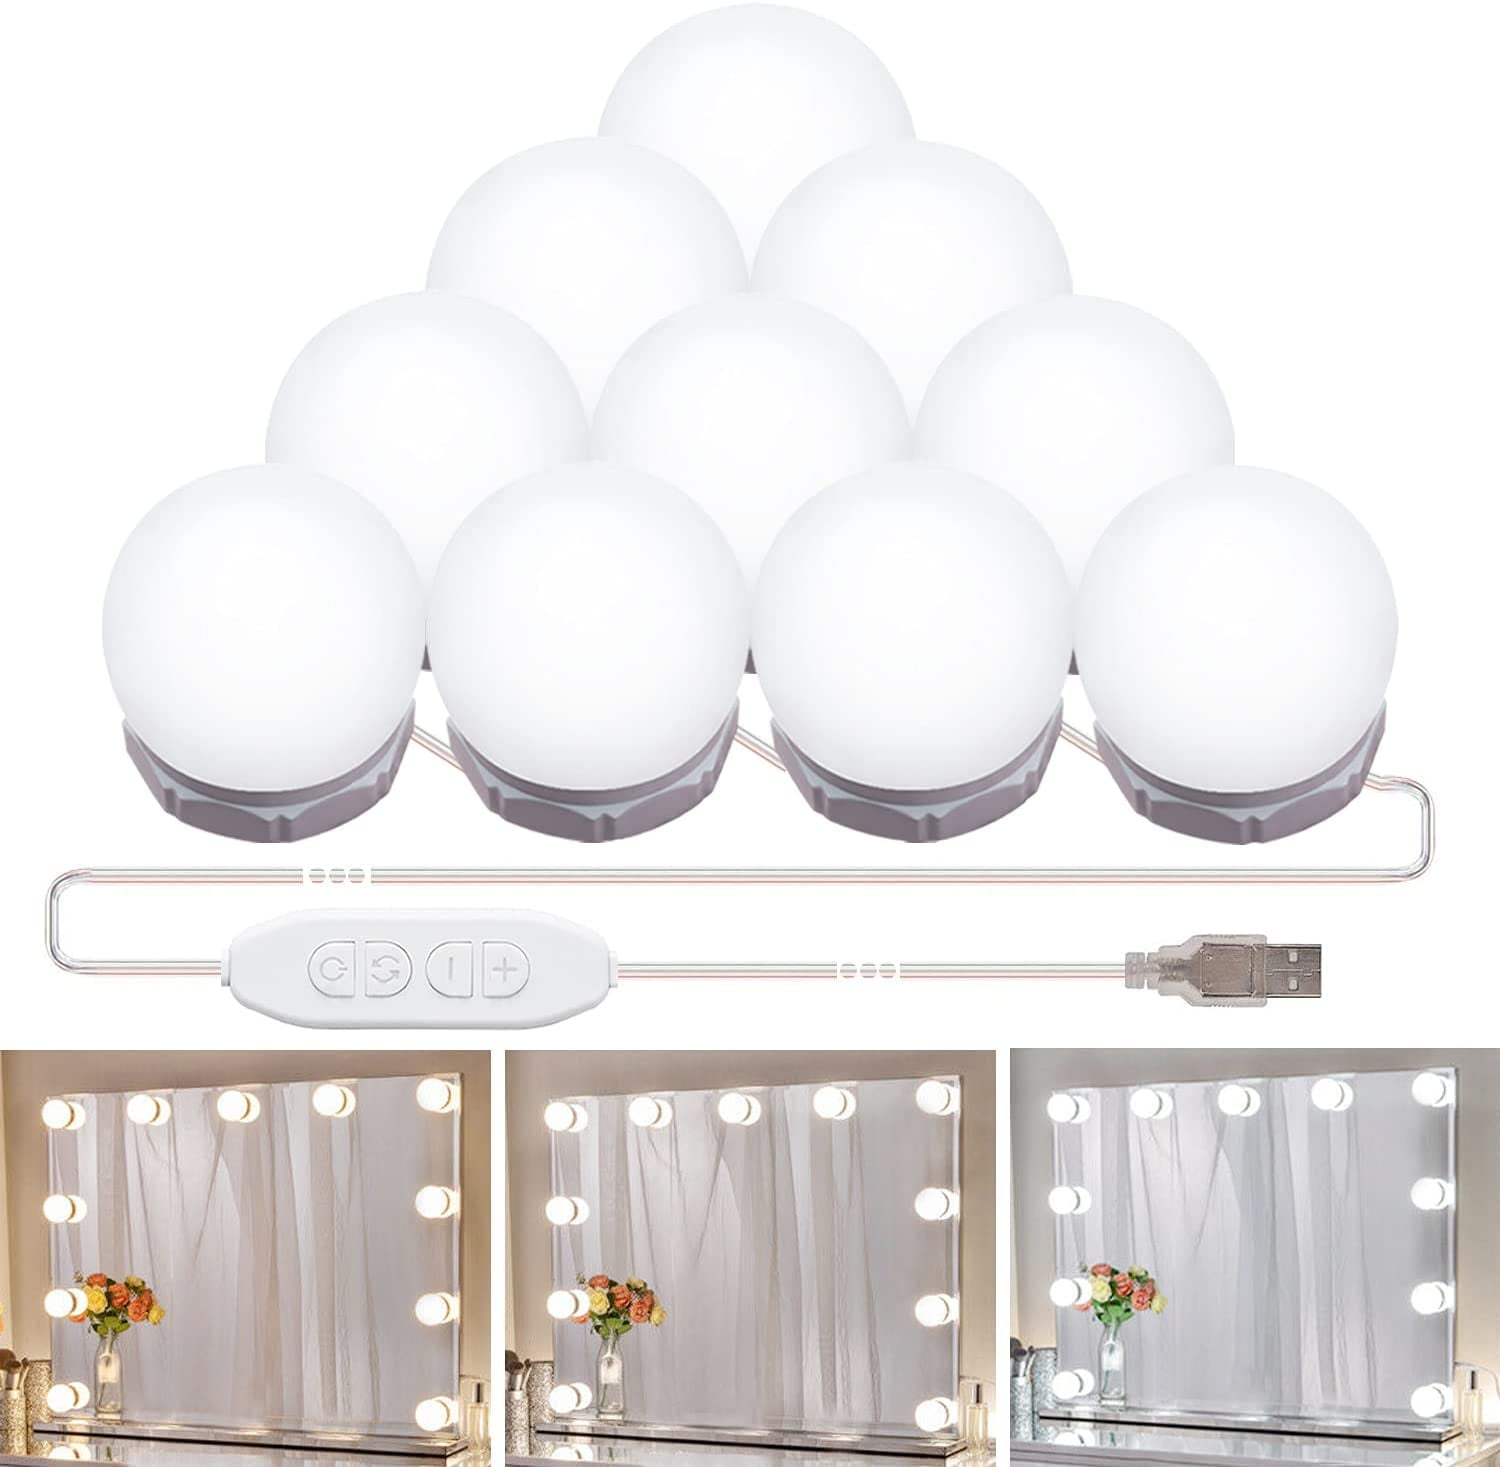 Vanity Mirror Lights,Self-Adhesive USB Powered 3 Colors Adjustable Hollywood Make-up Vanity Mirror Lights Lamps with 10-LED Bulbs for Makeup Table Bathroom Dressing Room Bedroom 